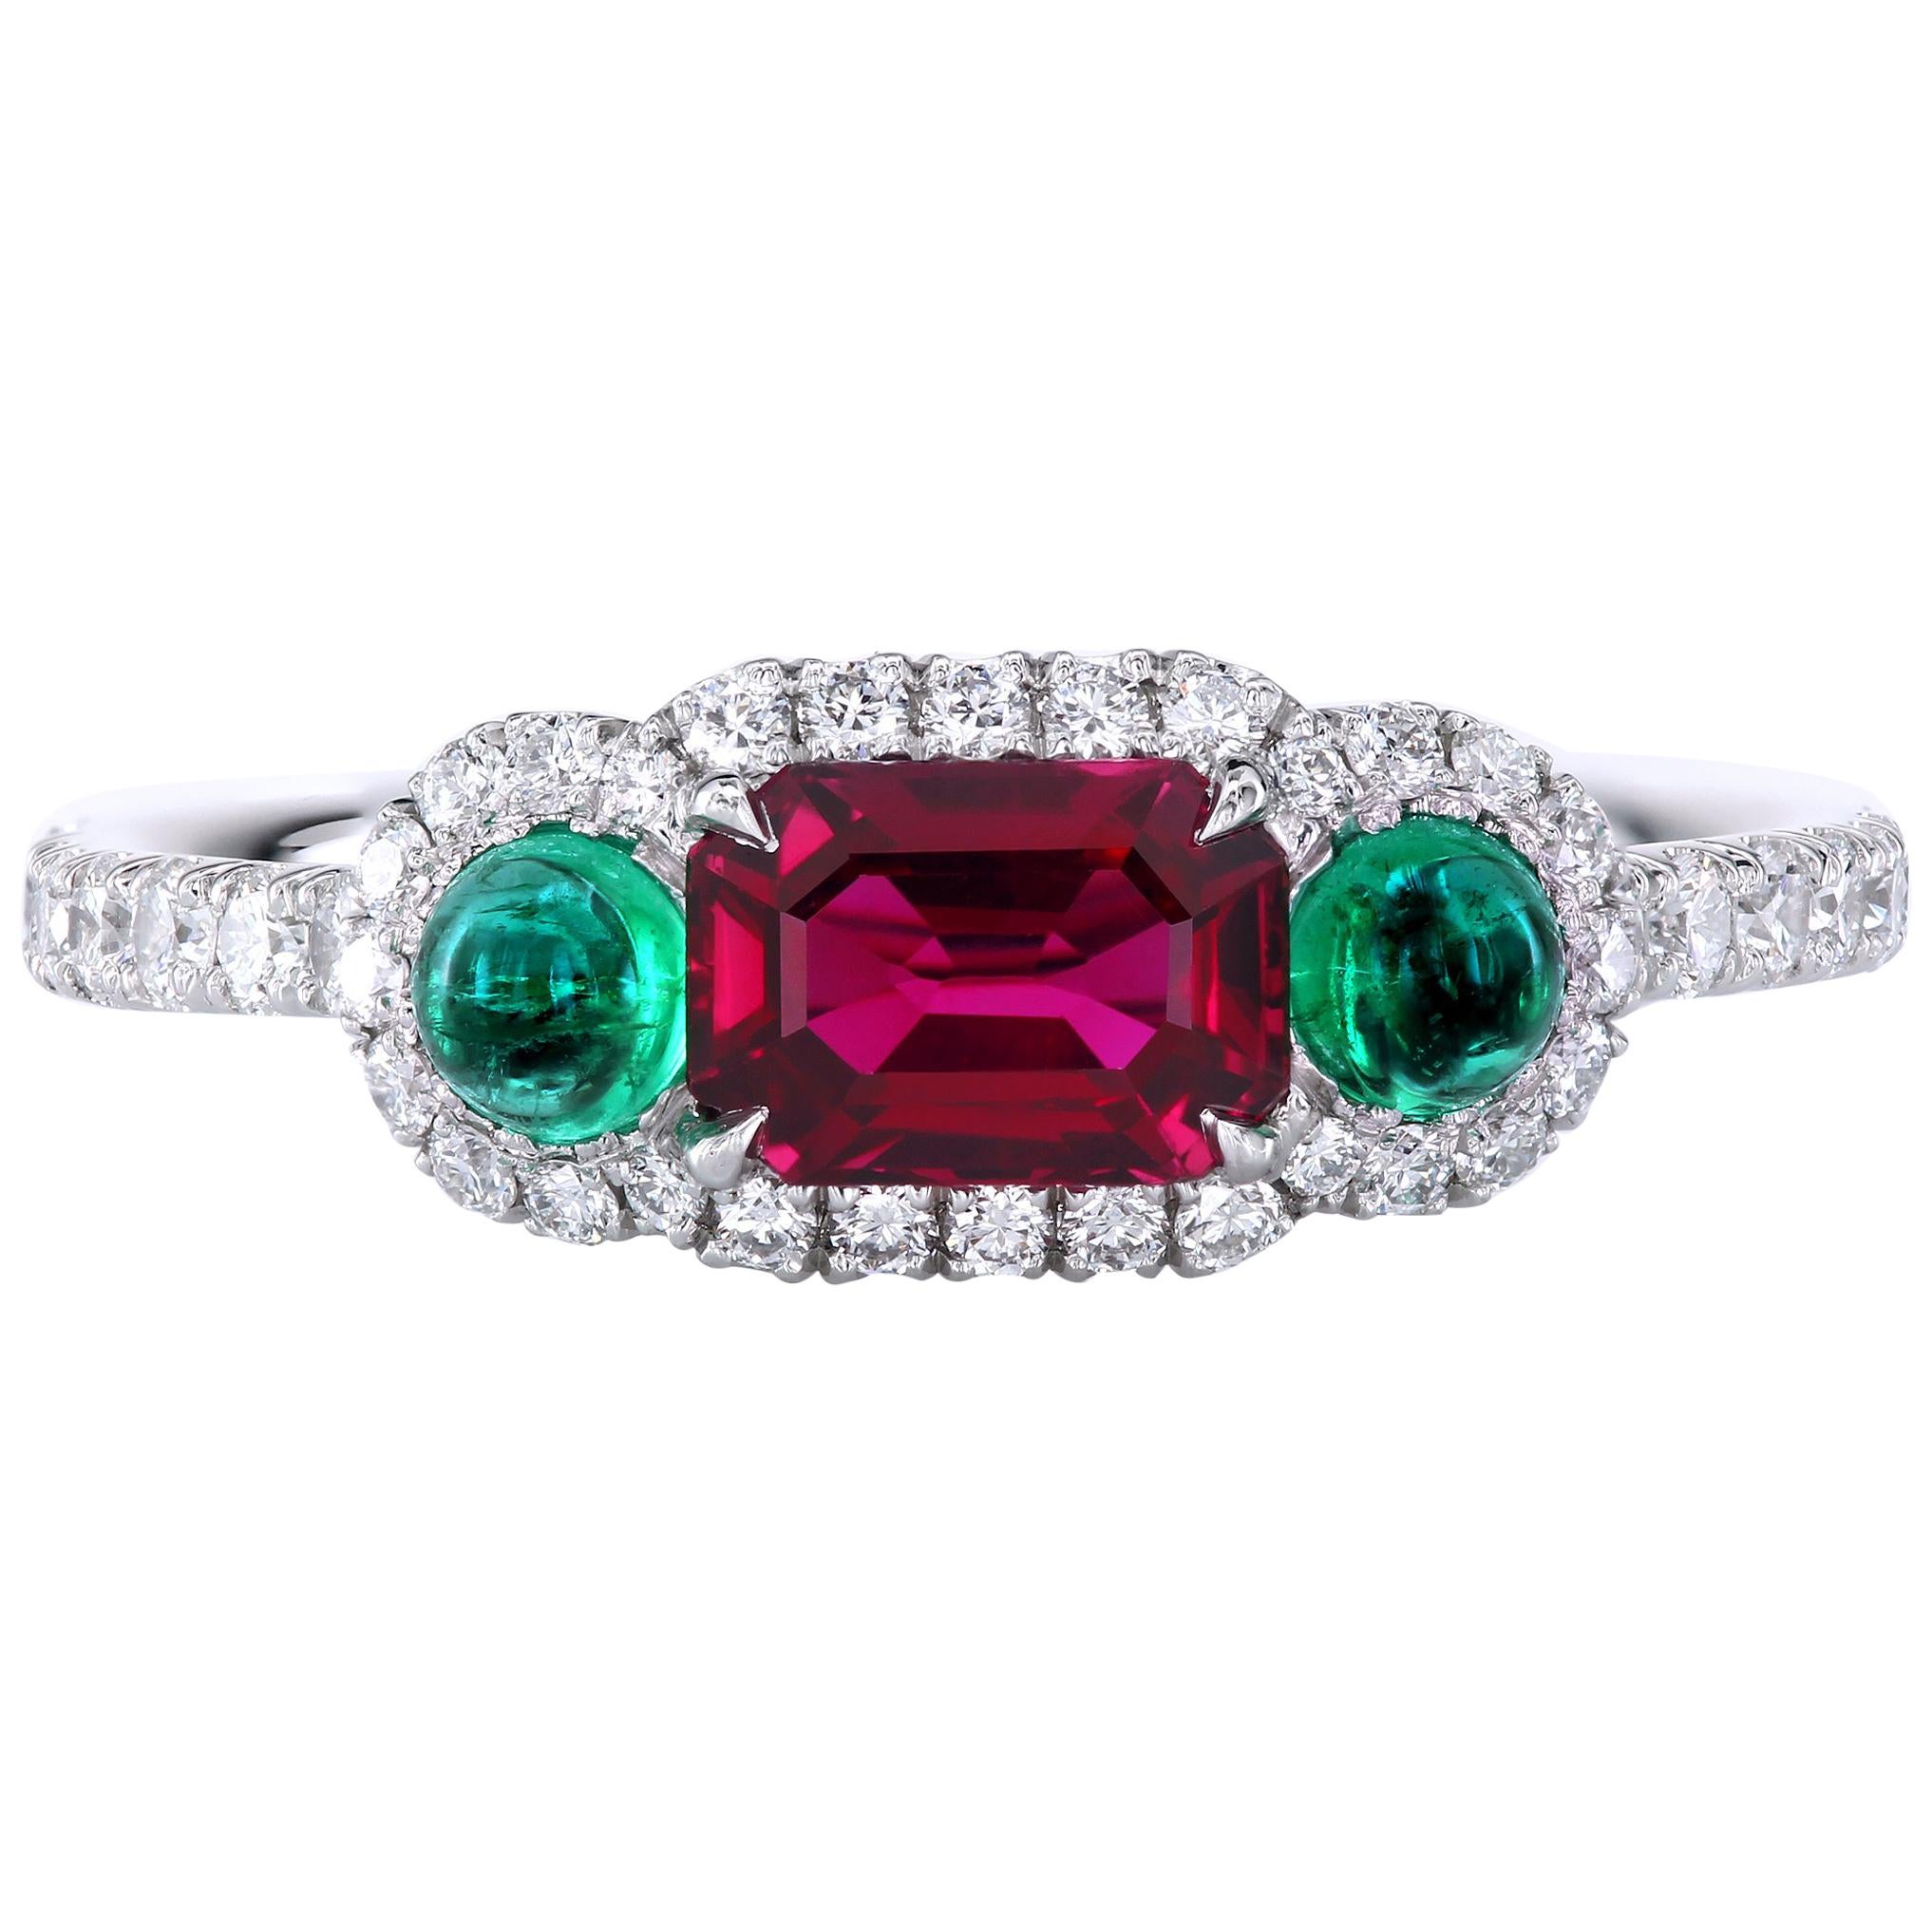 Leon Mege Ruby and Cab Emeralds in Micro Pave Platinum Bespoke Right-Hand Ring